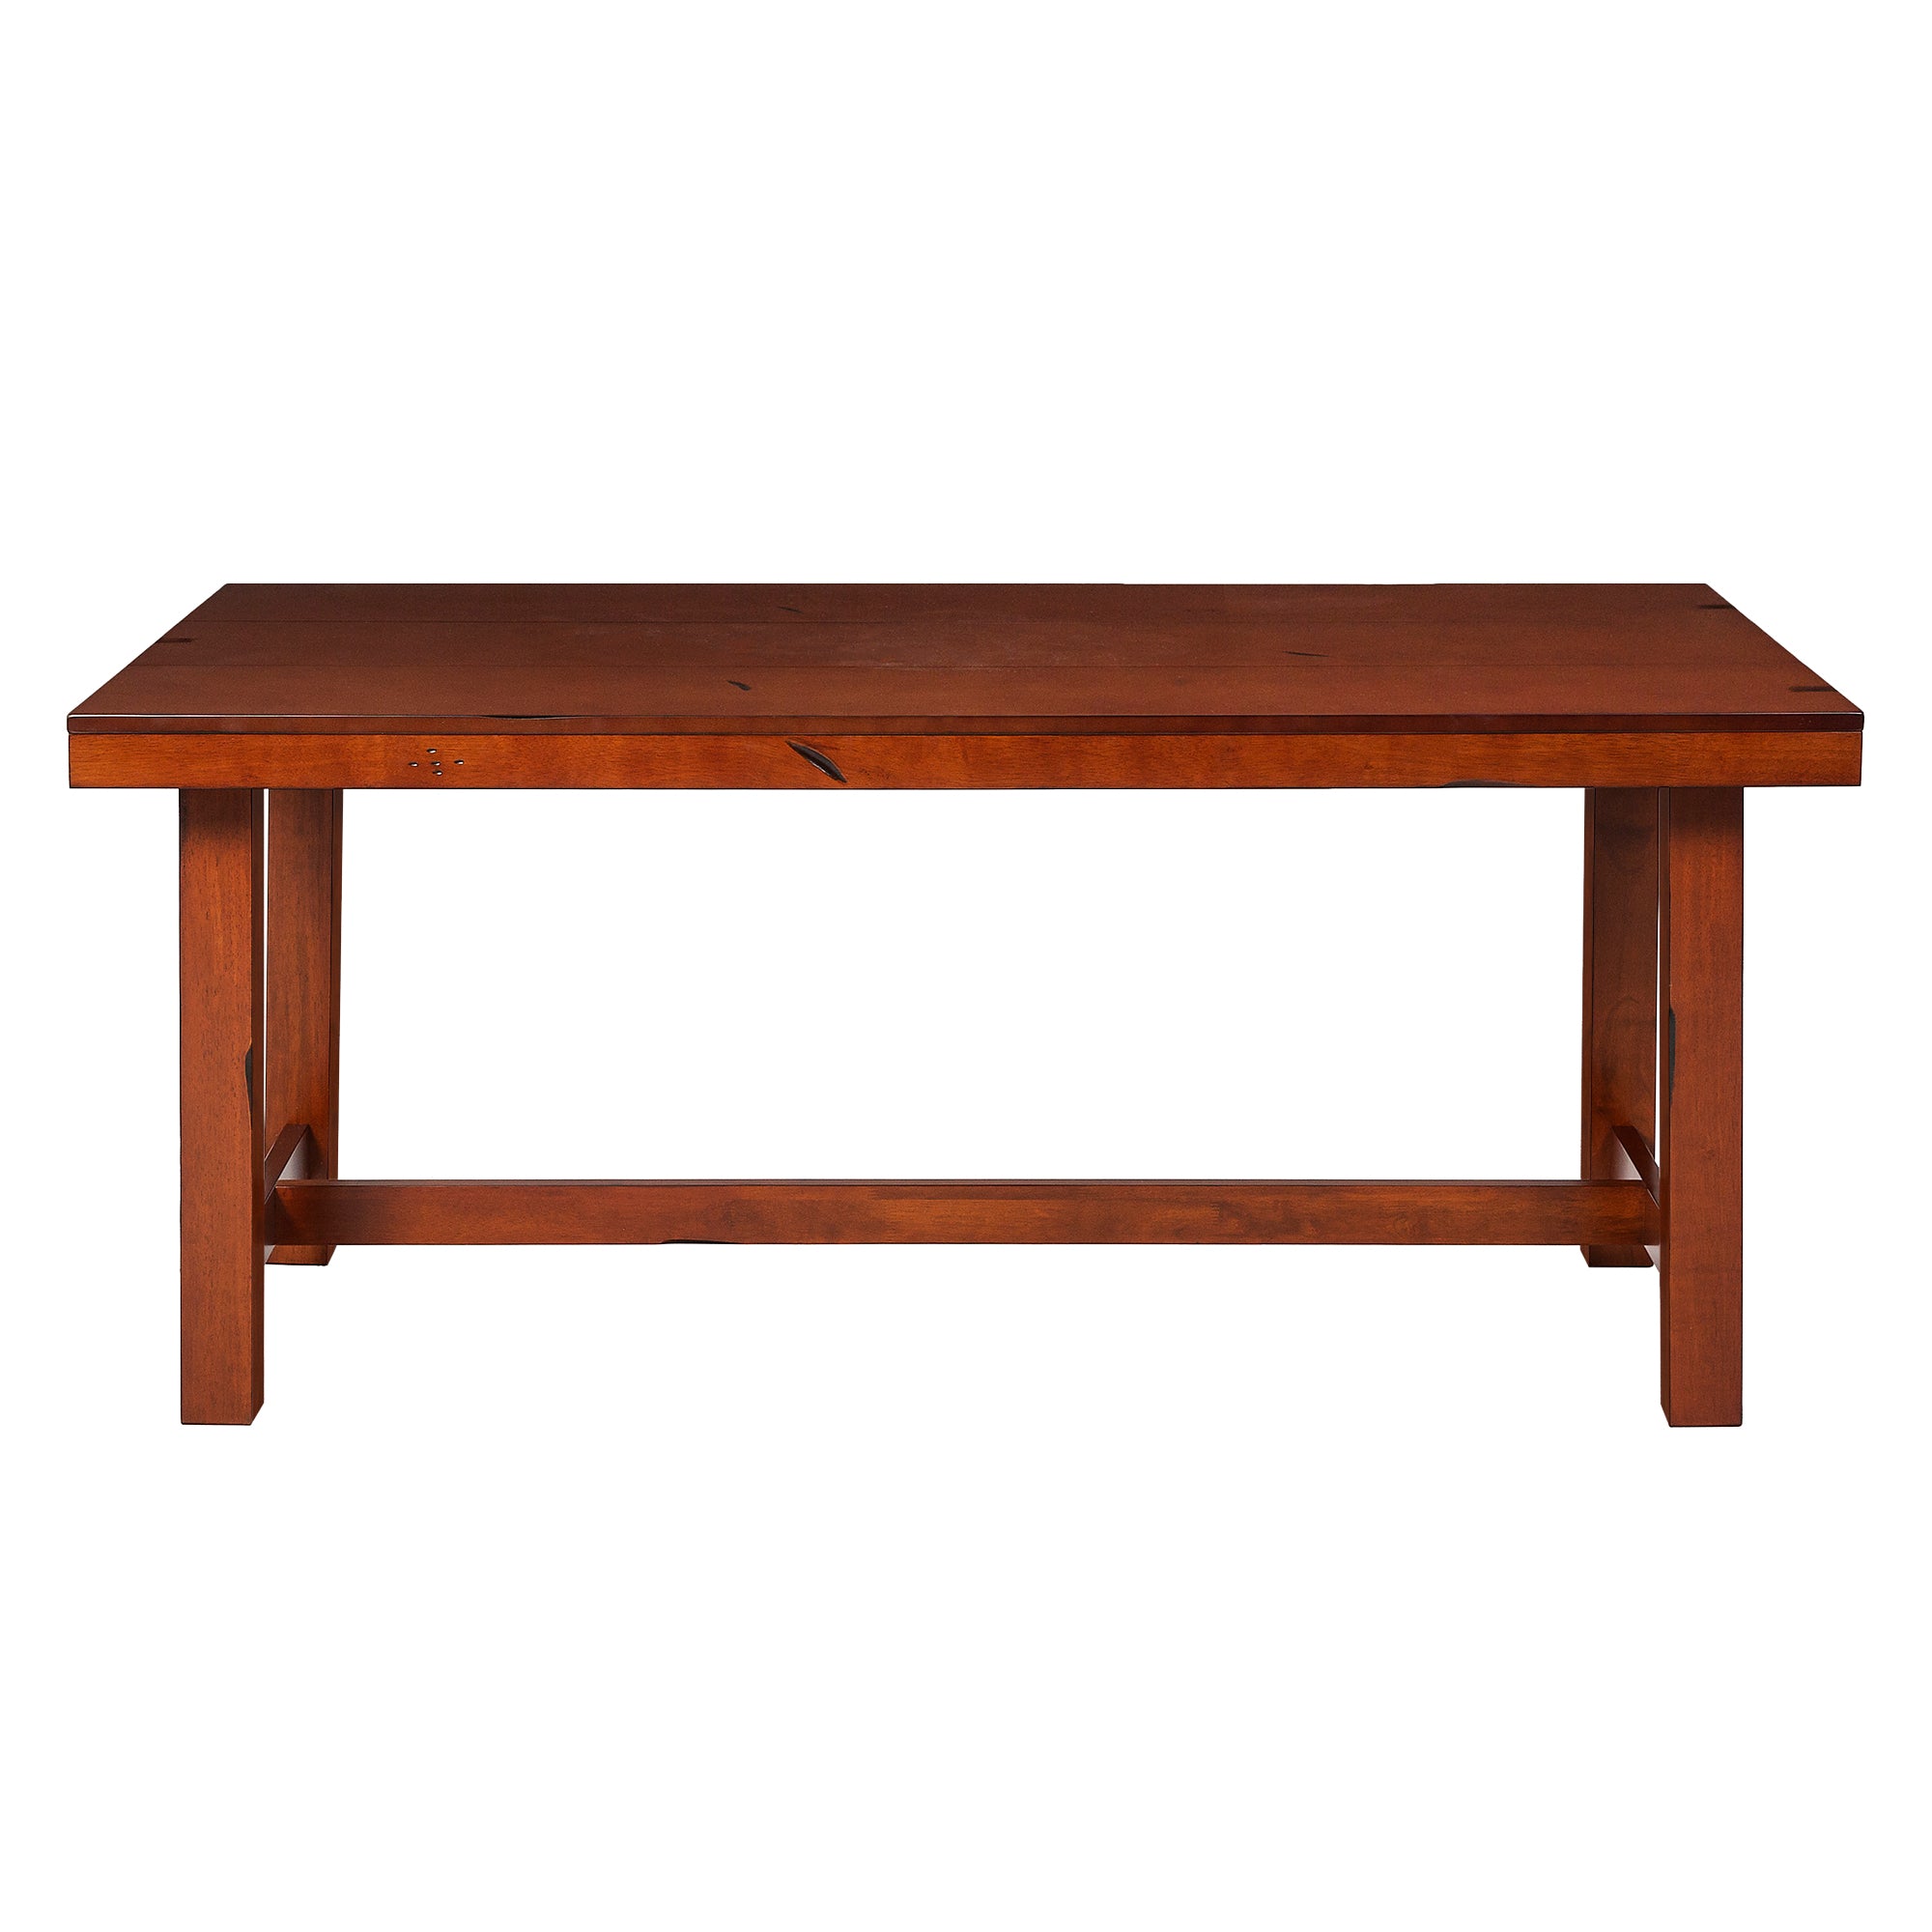 68" Rustic Wood Expandable Dining Table - East Shore Modern Home Furnishings